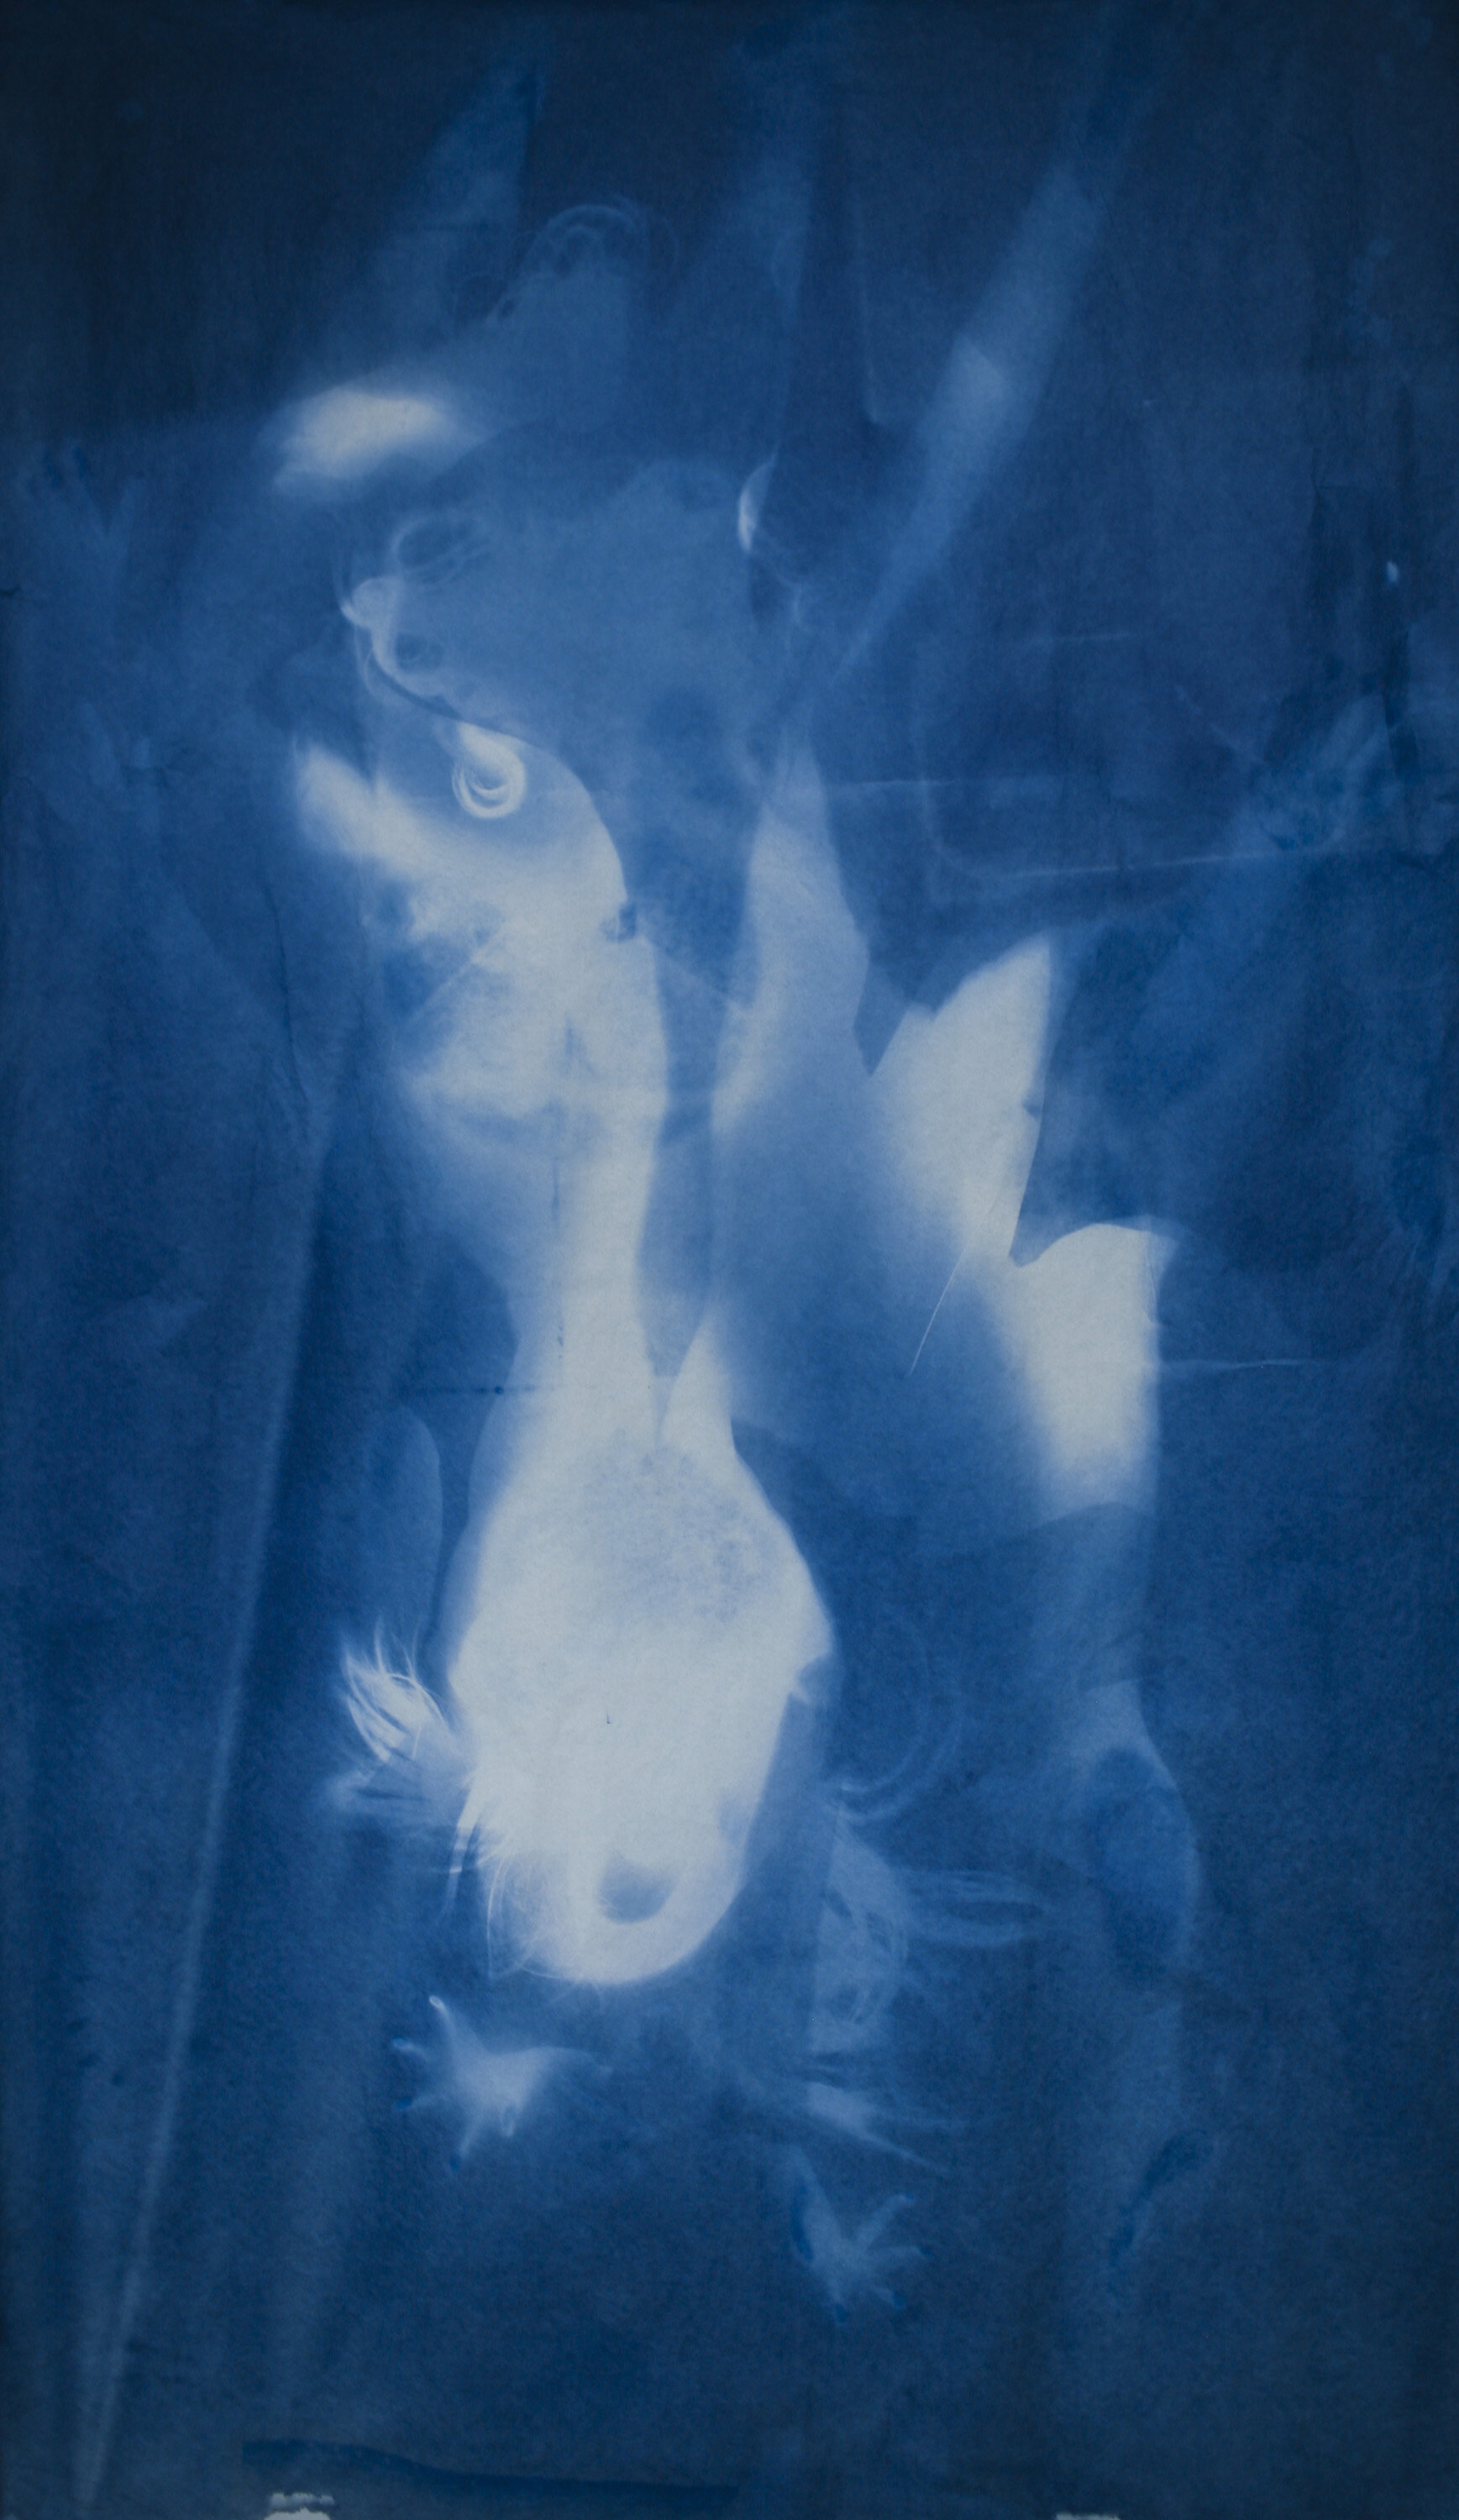  Han Qin,  Ethereal Evolving 6 , 2018. Cyanotype on paper, 82 x 47 inches ©Han Qin, courtesy Fou Gallery 